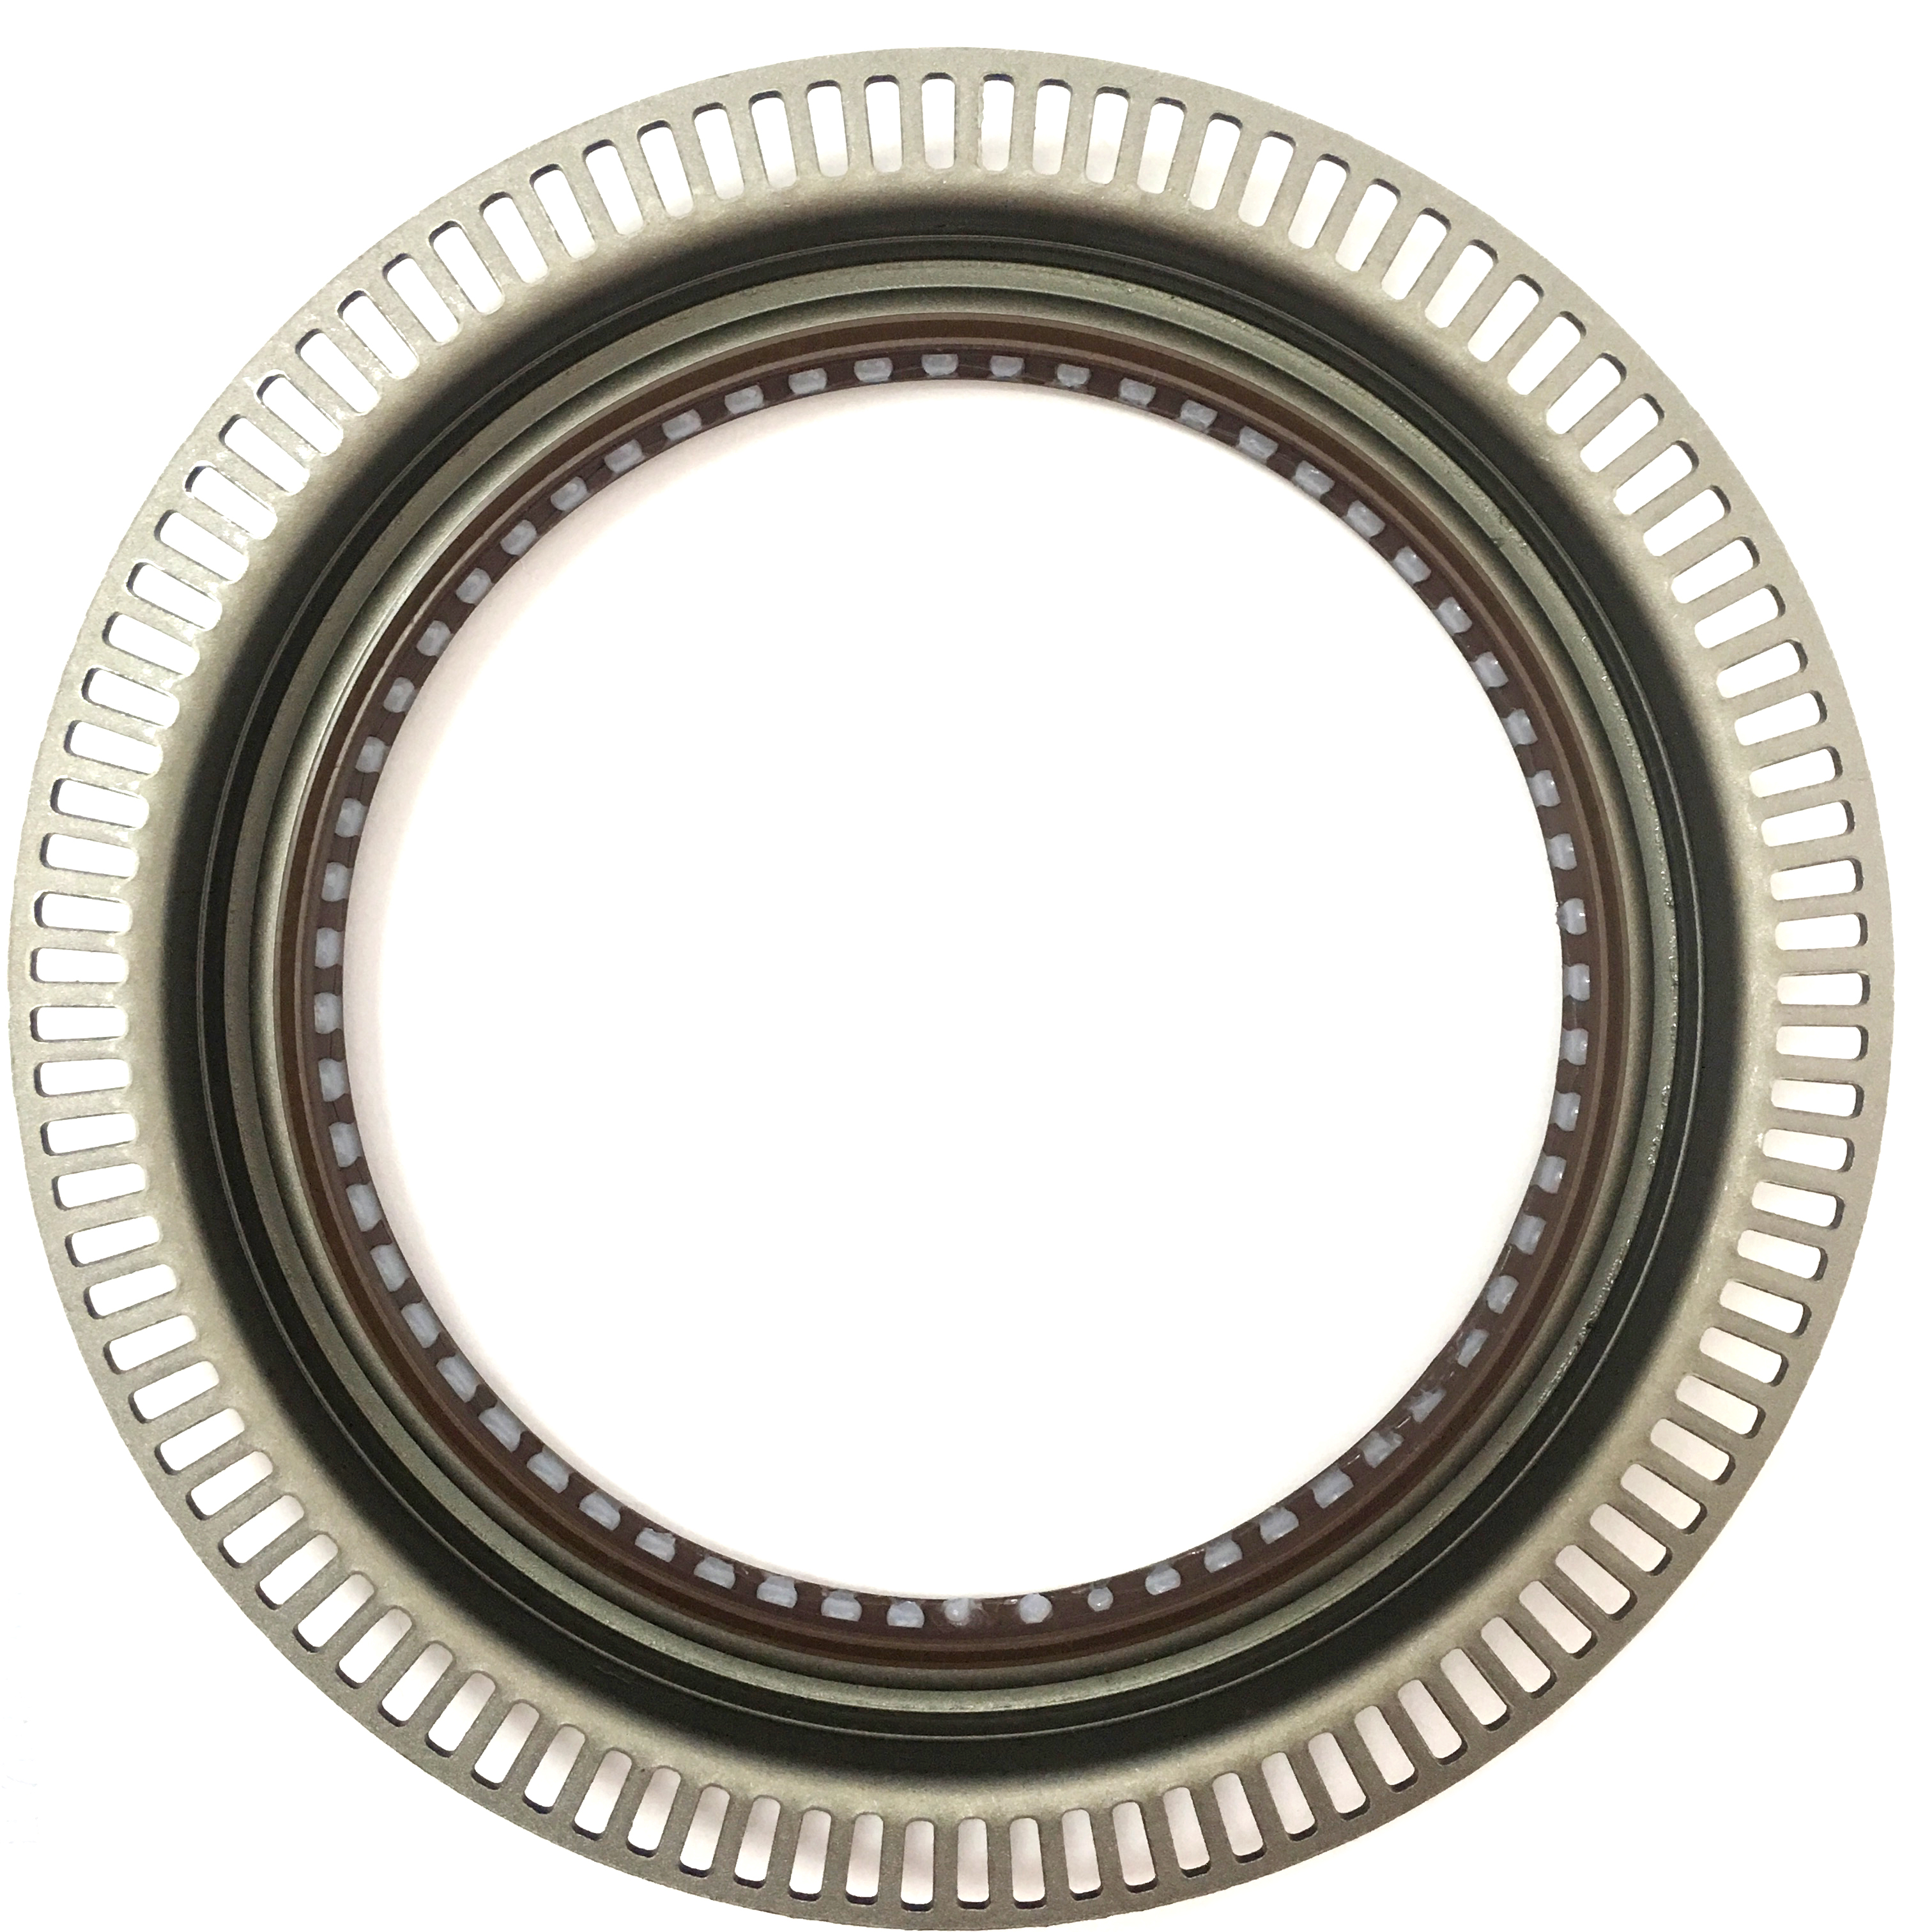 Truck Wheel Hub Shaft Oil Seal For Mercedes-Benz And MAN Size 145*175/205*18/20 OE 0209970547